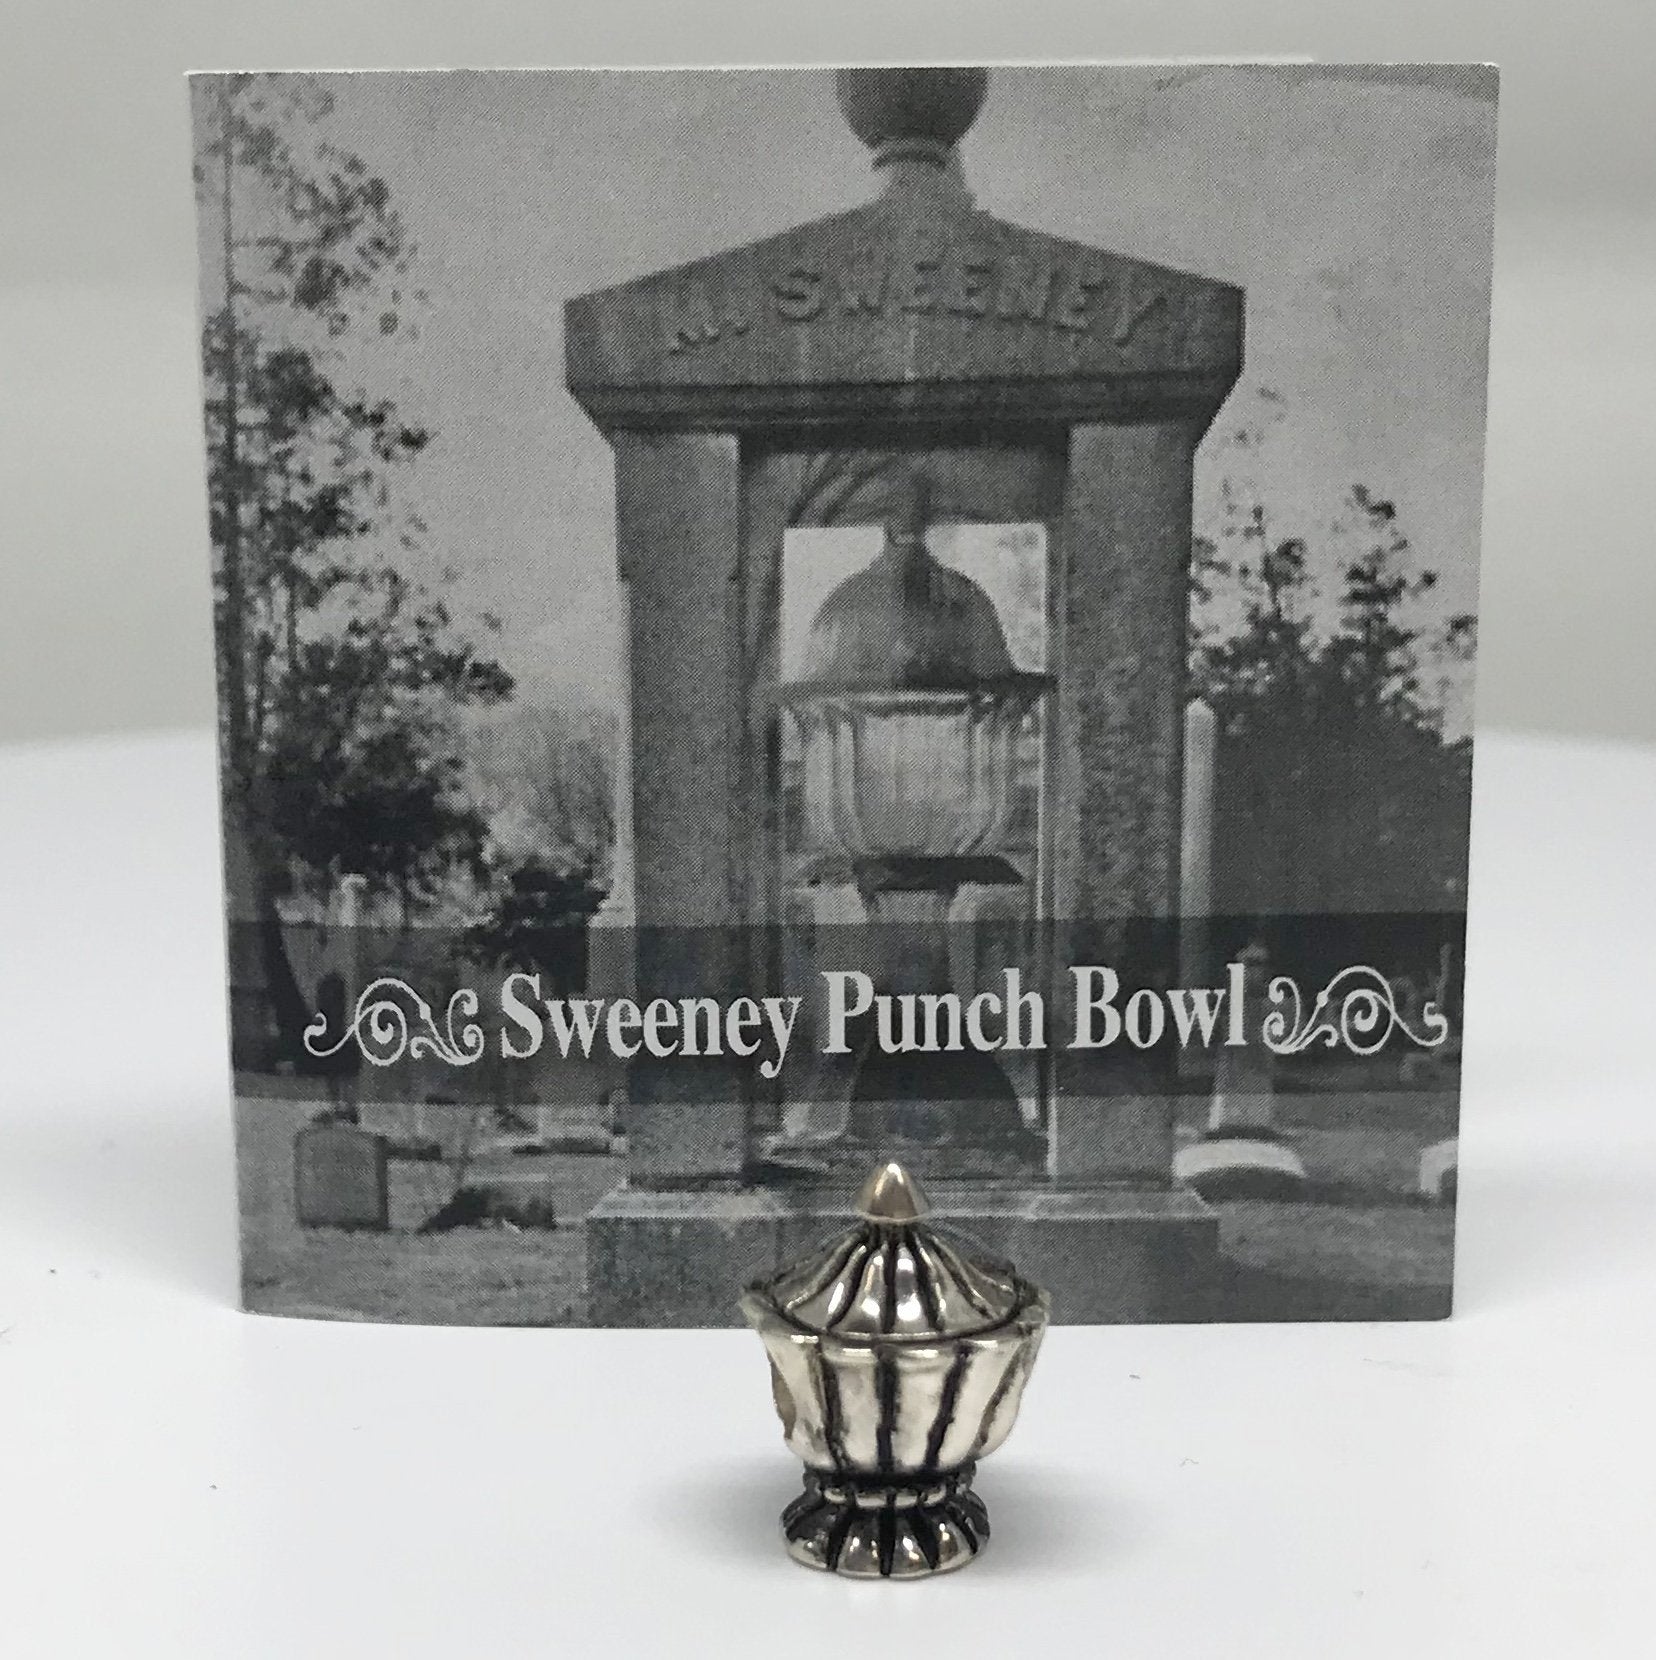 The Sweeney Punch Bowl Bead-Howard's Exclusive-Howard's Diamond Center